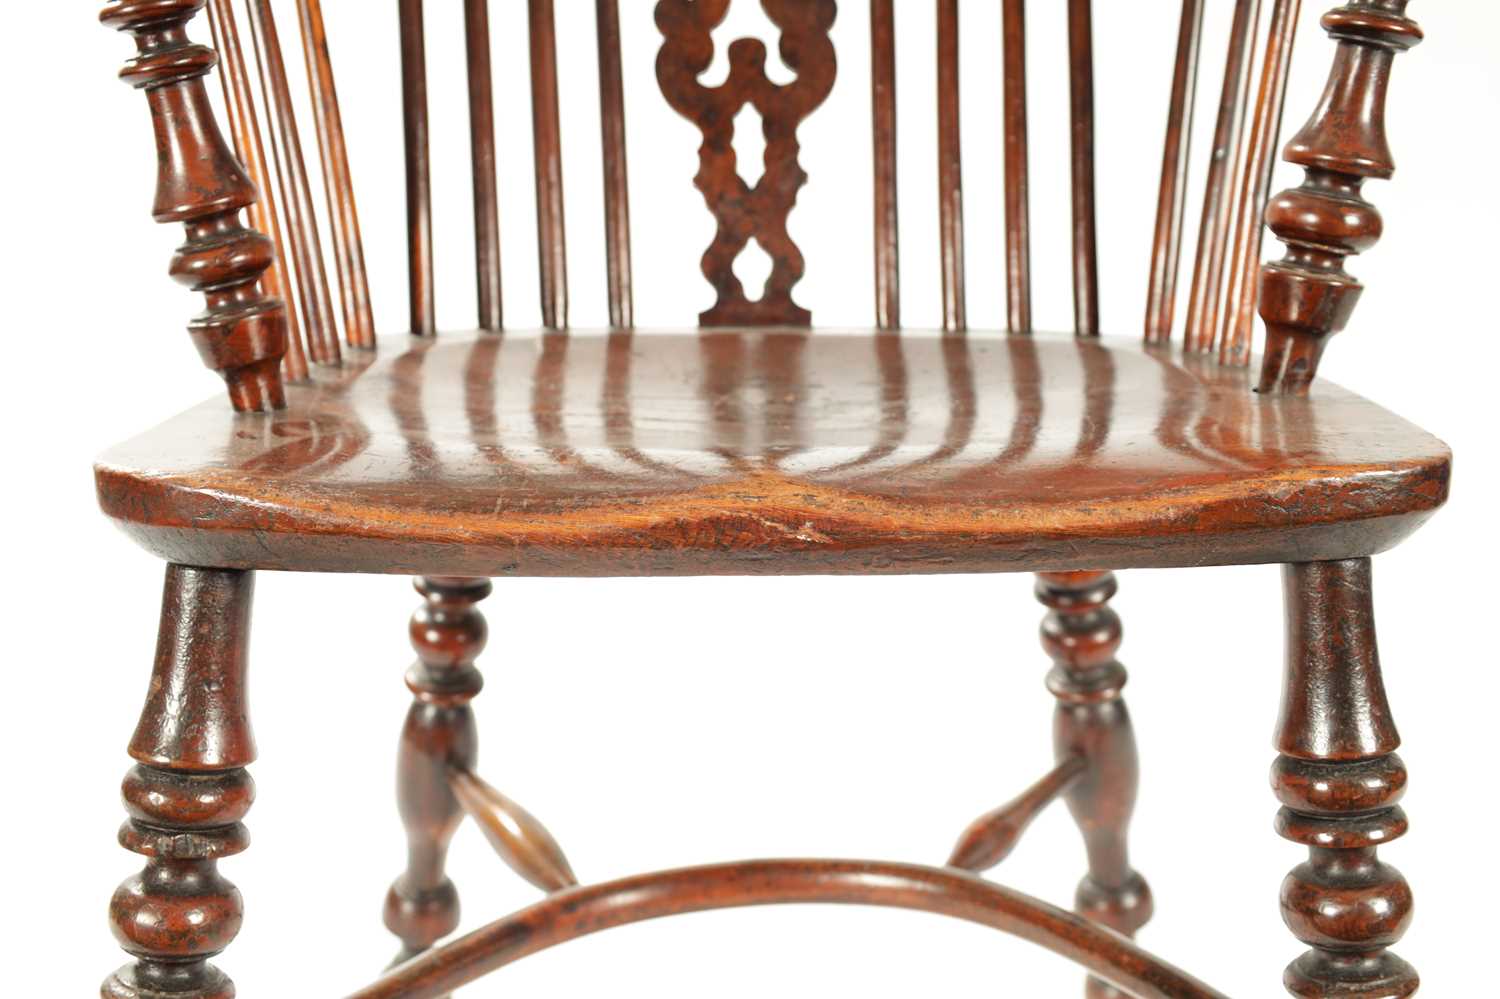 AN EARLY 19TH CENTURY NOTTINGHAMSHIRE YEW-WOOD HIGH BACK WINDSOR CHAIR - Image 7 of 9